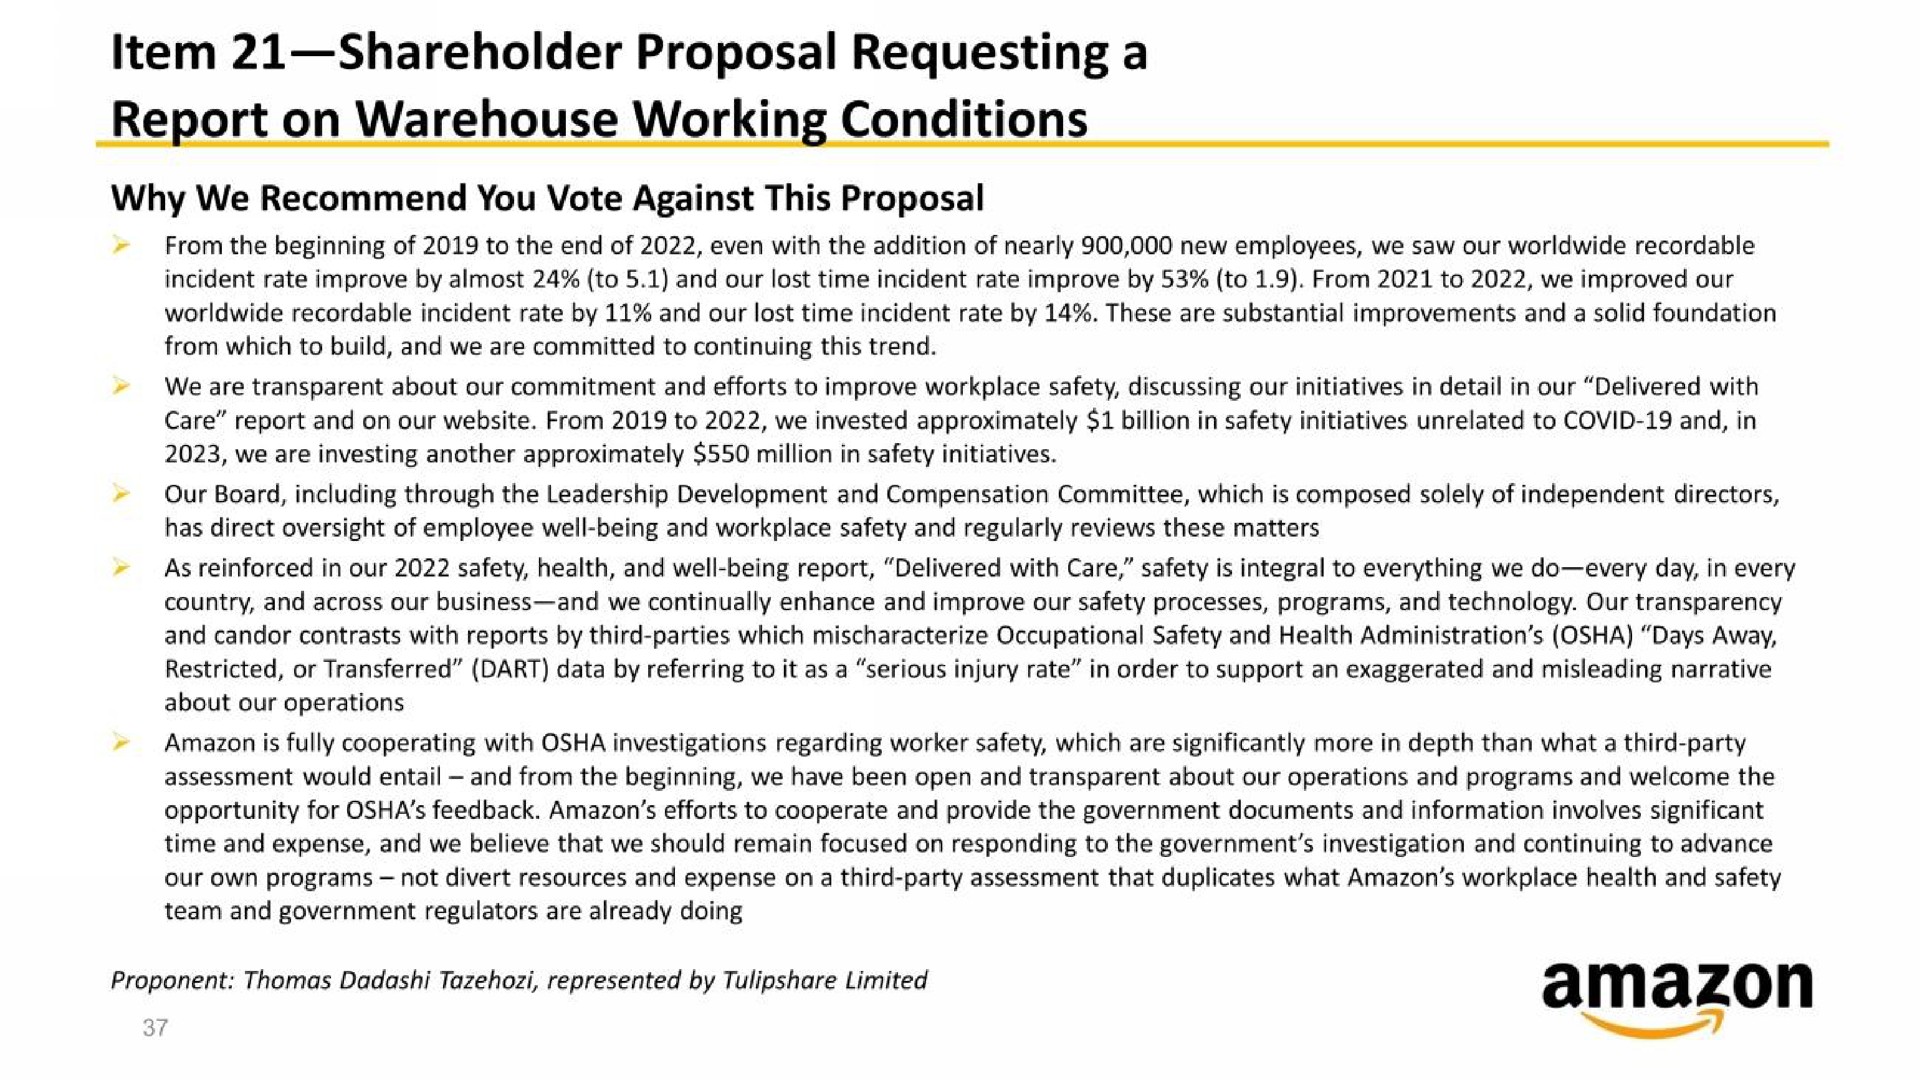 item shareholder proposal requesting a report on warehouse working conditions | Amazon